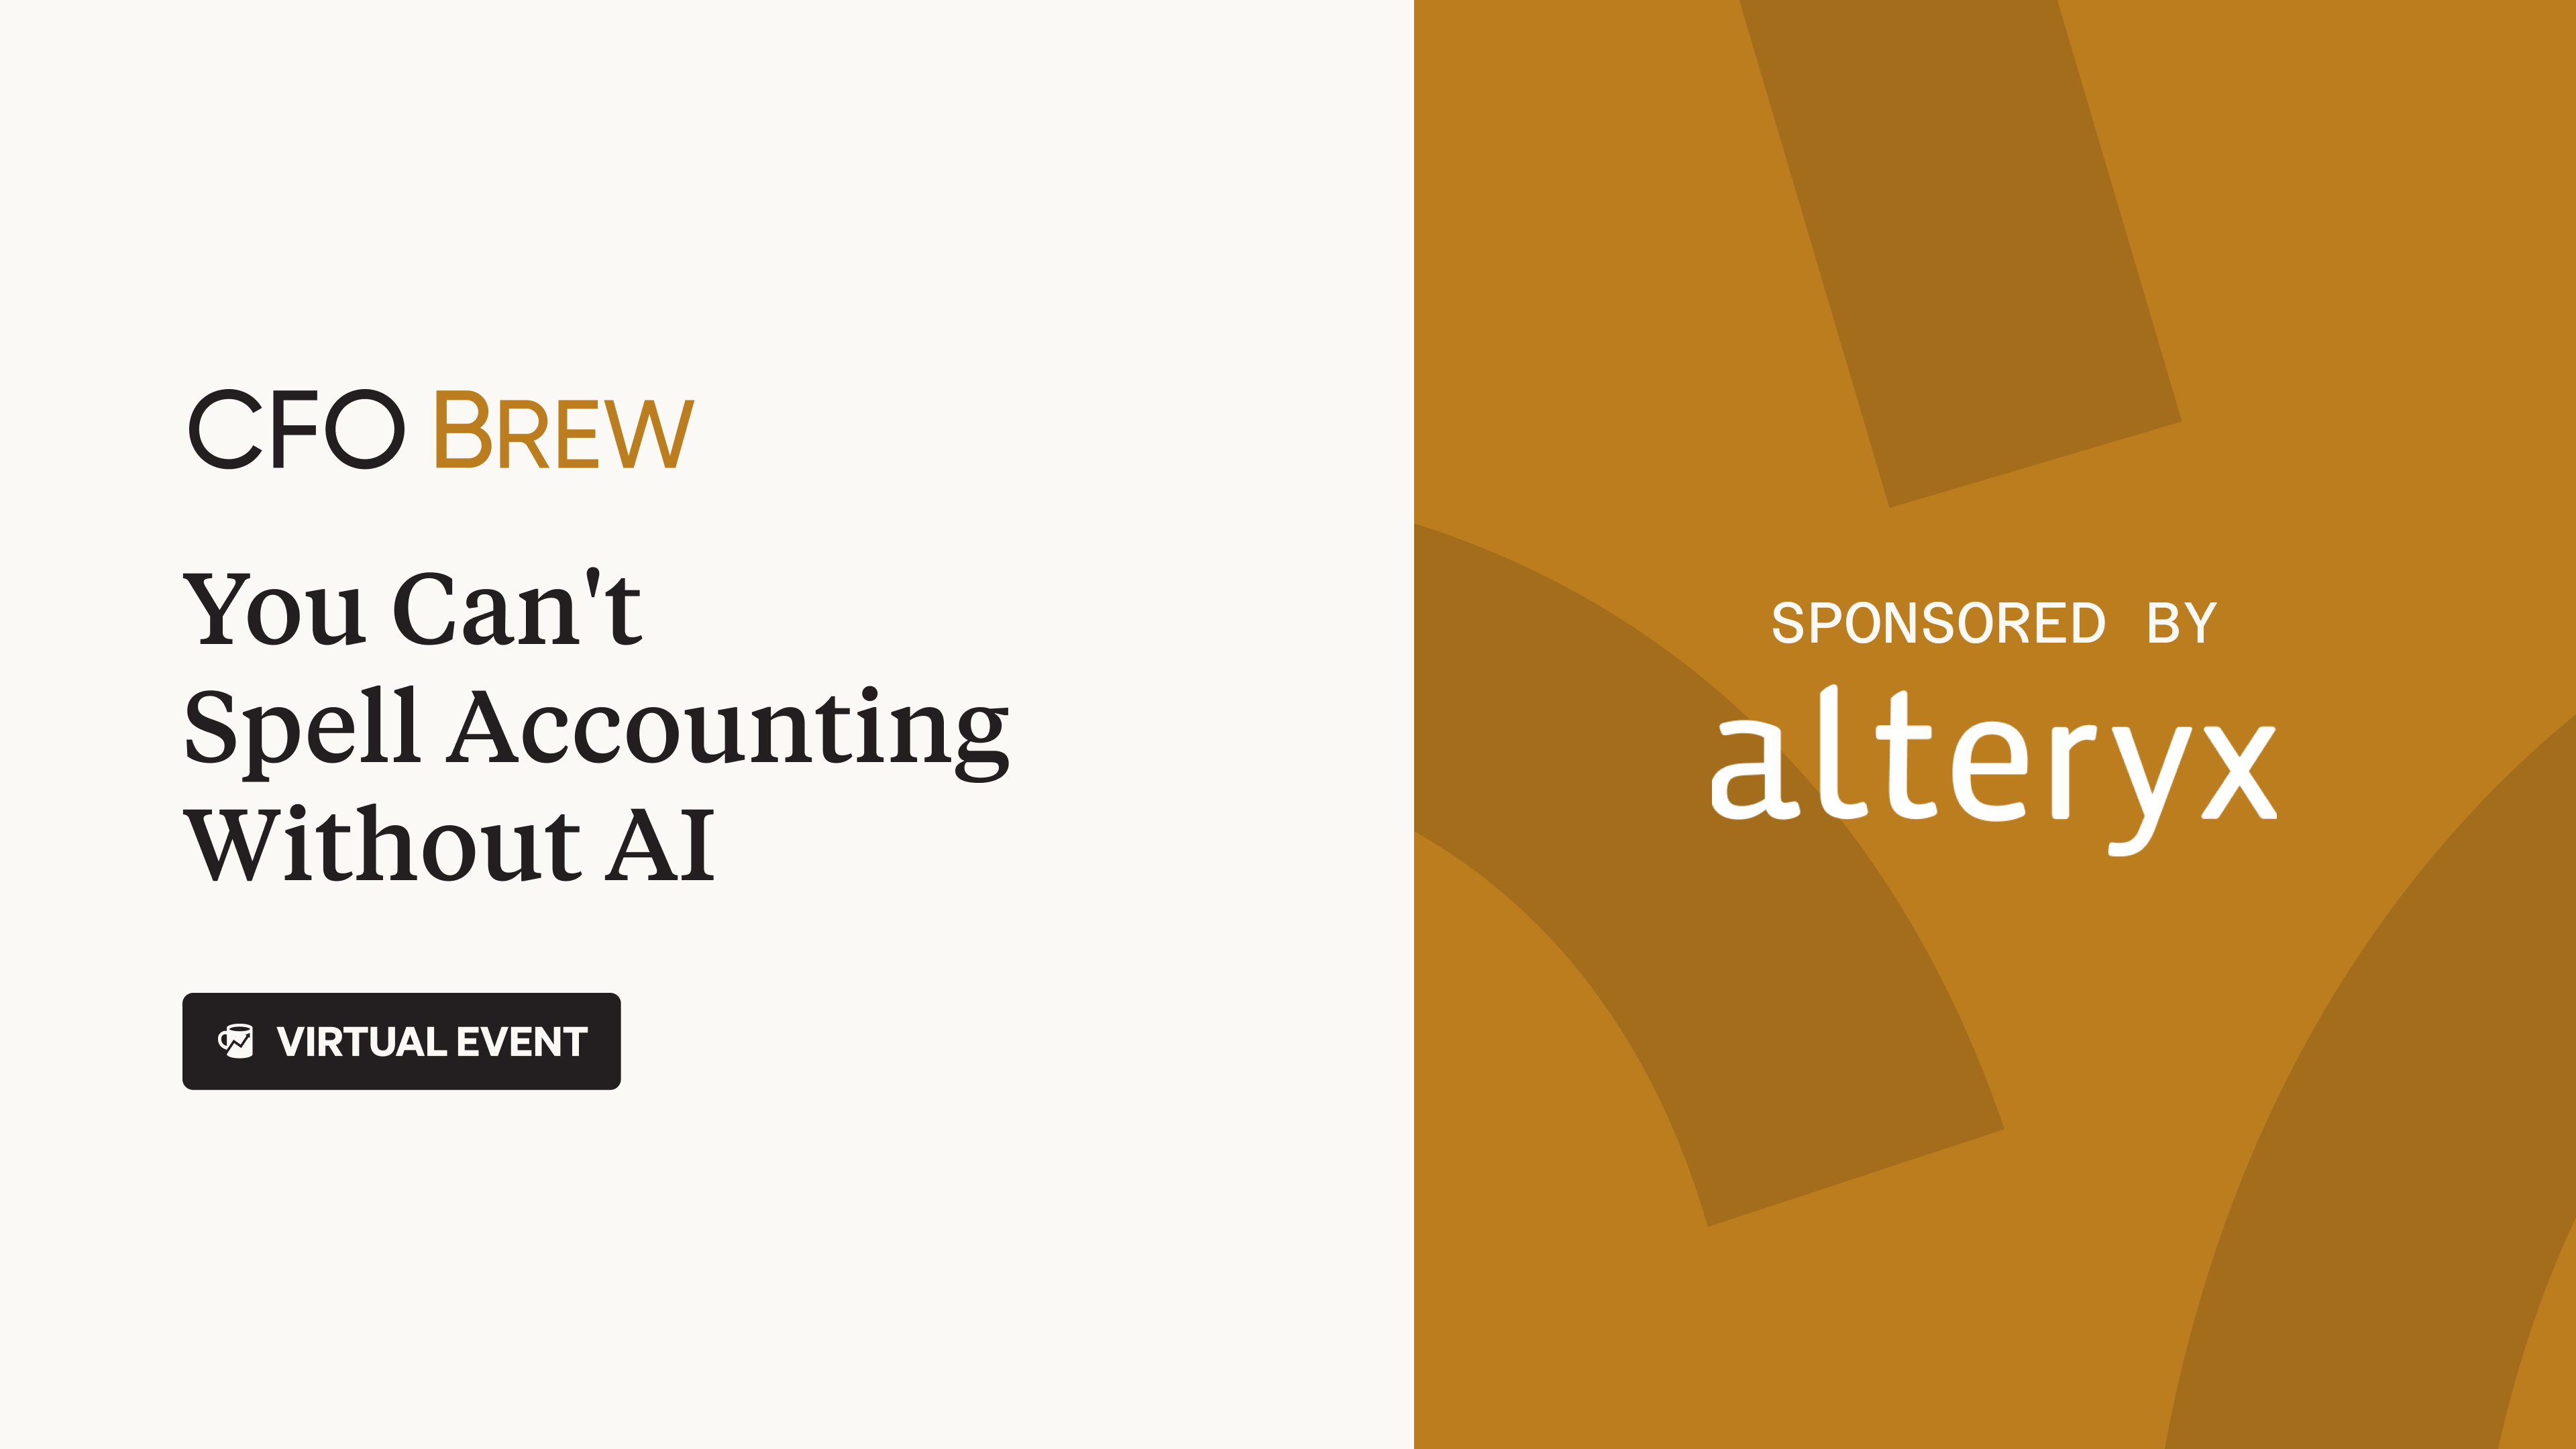 CFO Brew virtual event “You Can’t Spell Accounting without AI” sponsored by alteryx